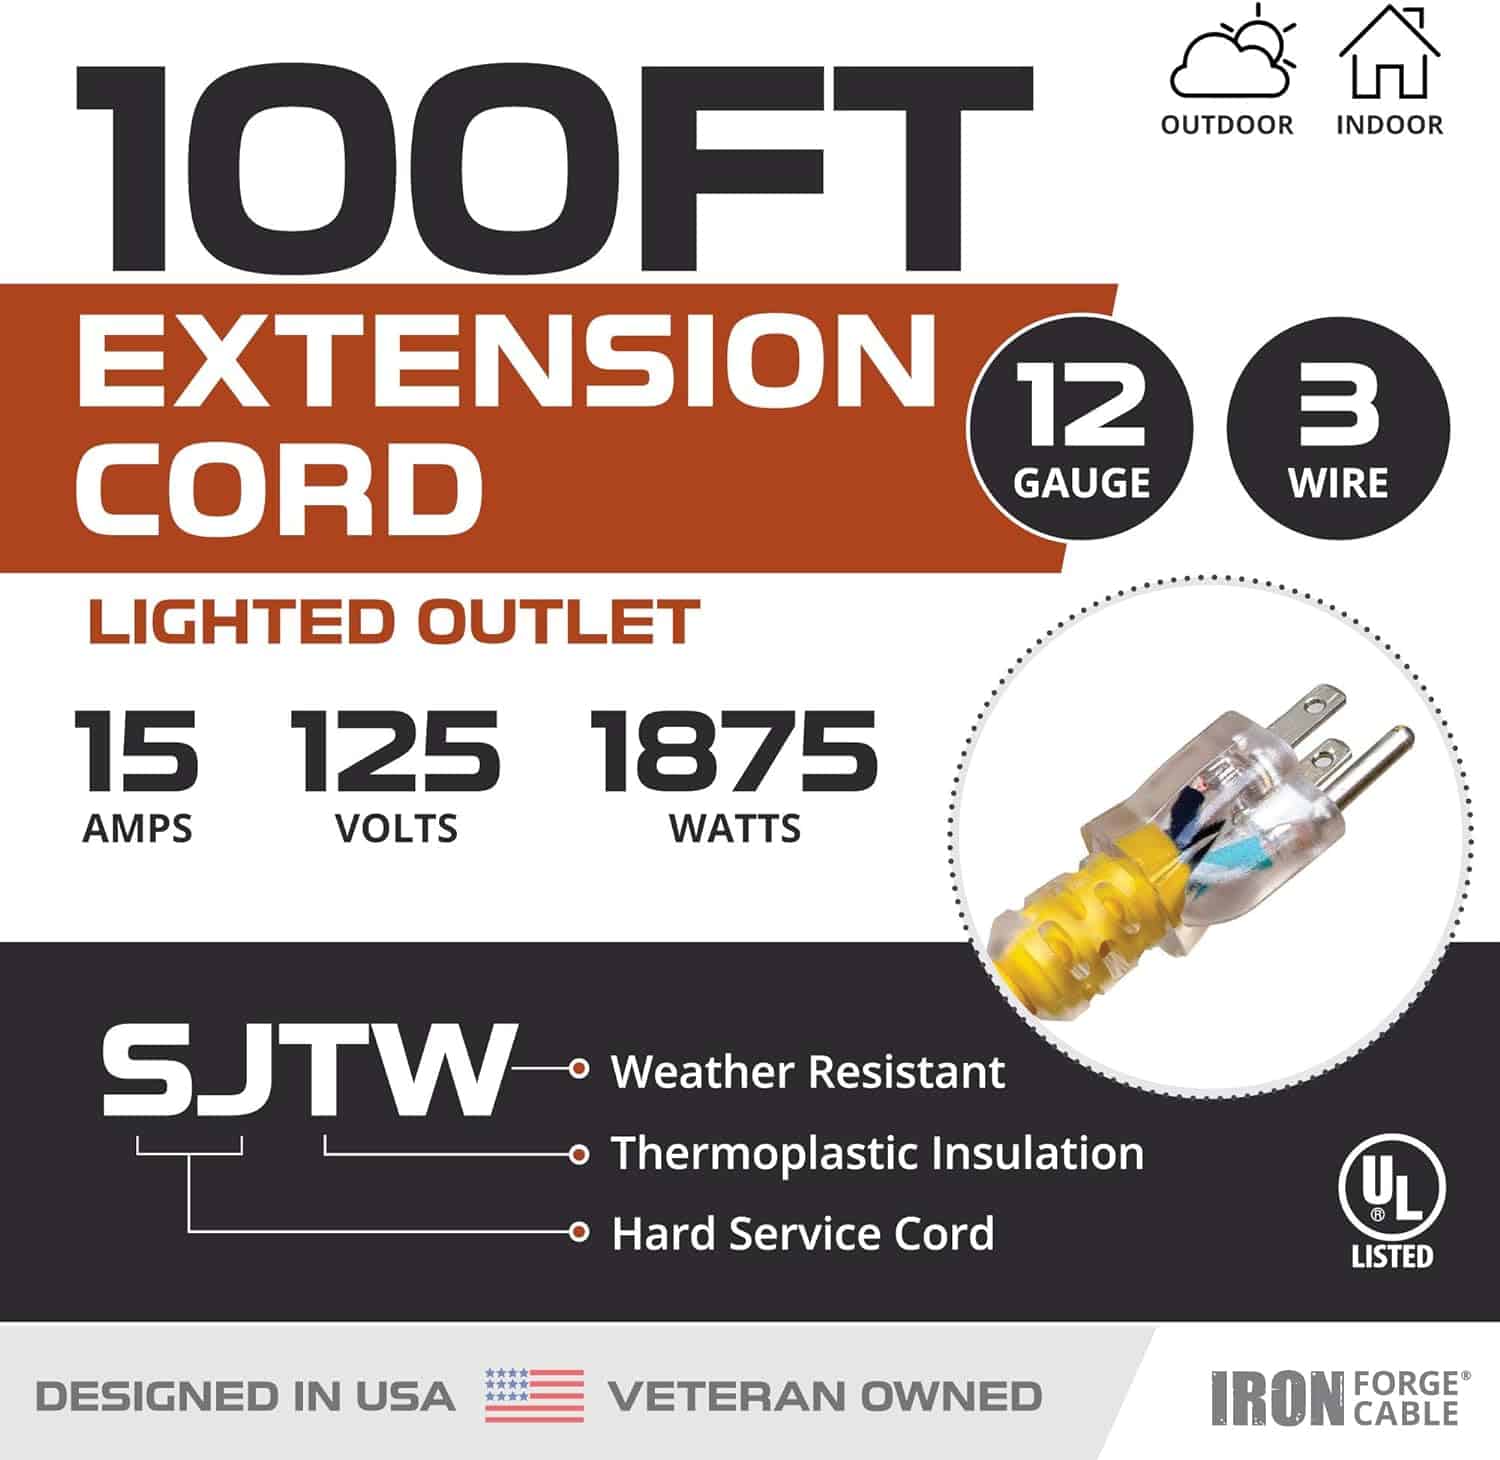 IRON-FORGE-CABLE-100-Foot-Outdoor-Extension-Cord-12-3-SJTW-Heavy-Duty-Yellow-3-Prong-Extension-Cable-15-AMP-Great-for-Garden-and-Major-Appliances-